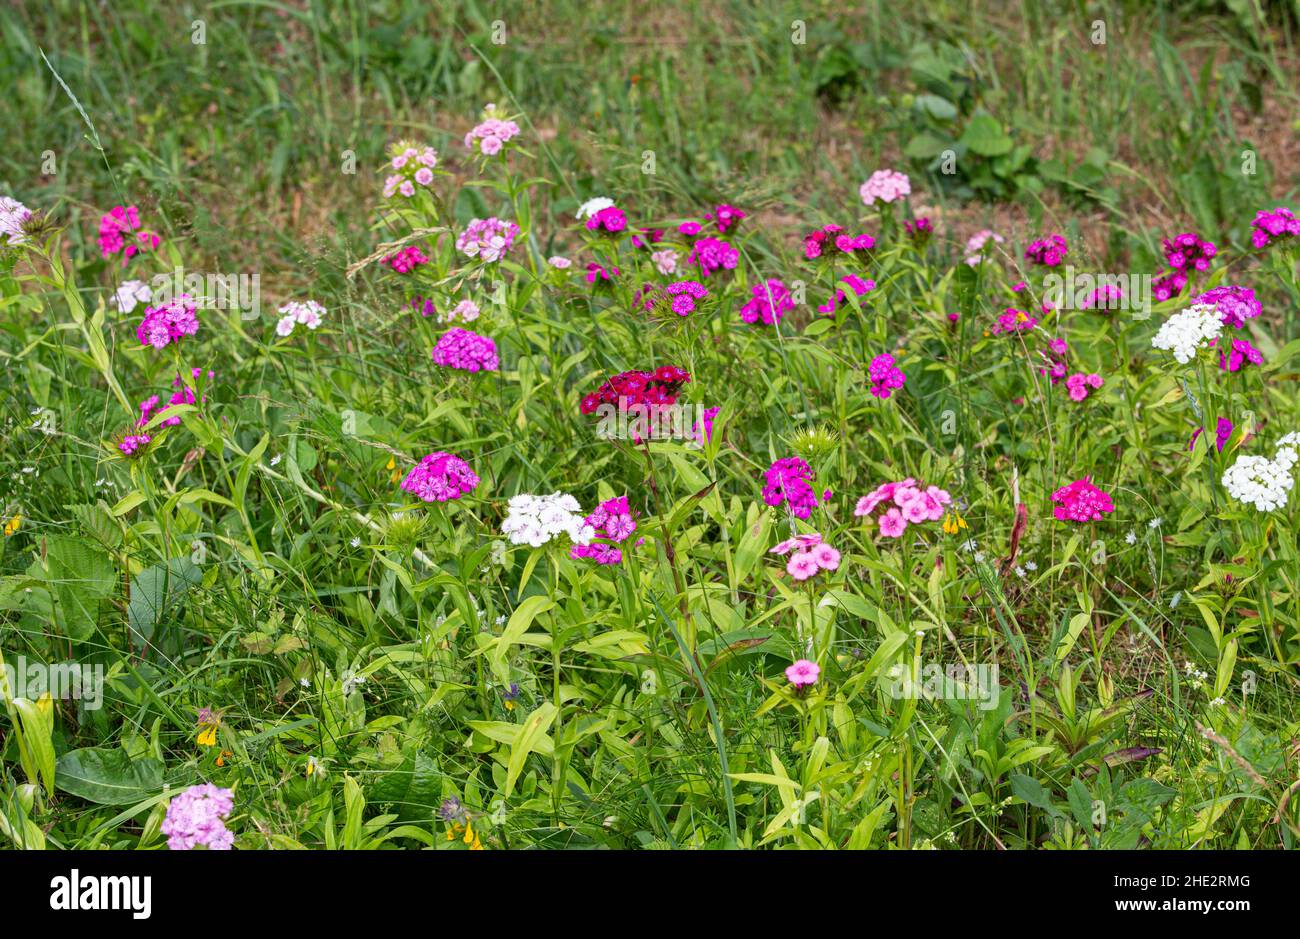 Dianthus barbatus the sweet William flowers in bloom in flowerbed outdoors in summer. Different colors: light pink, white, dark pink, violet. Stock Photo